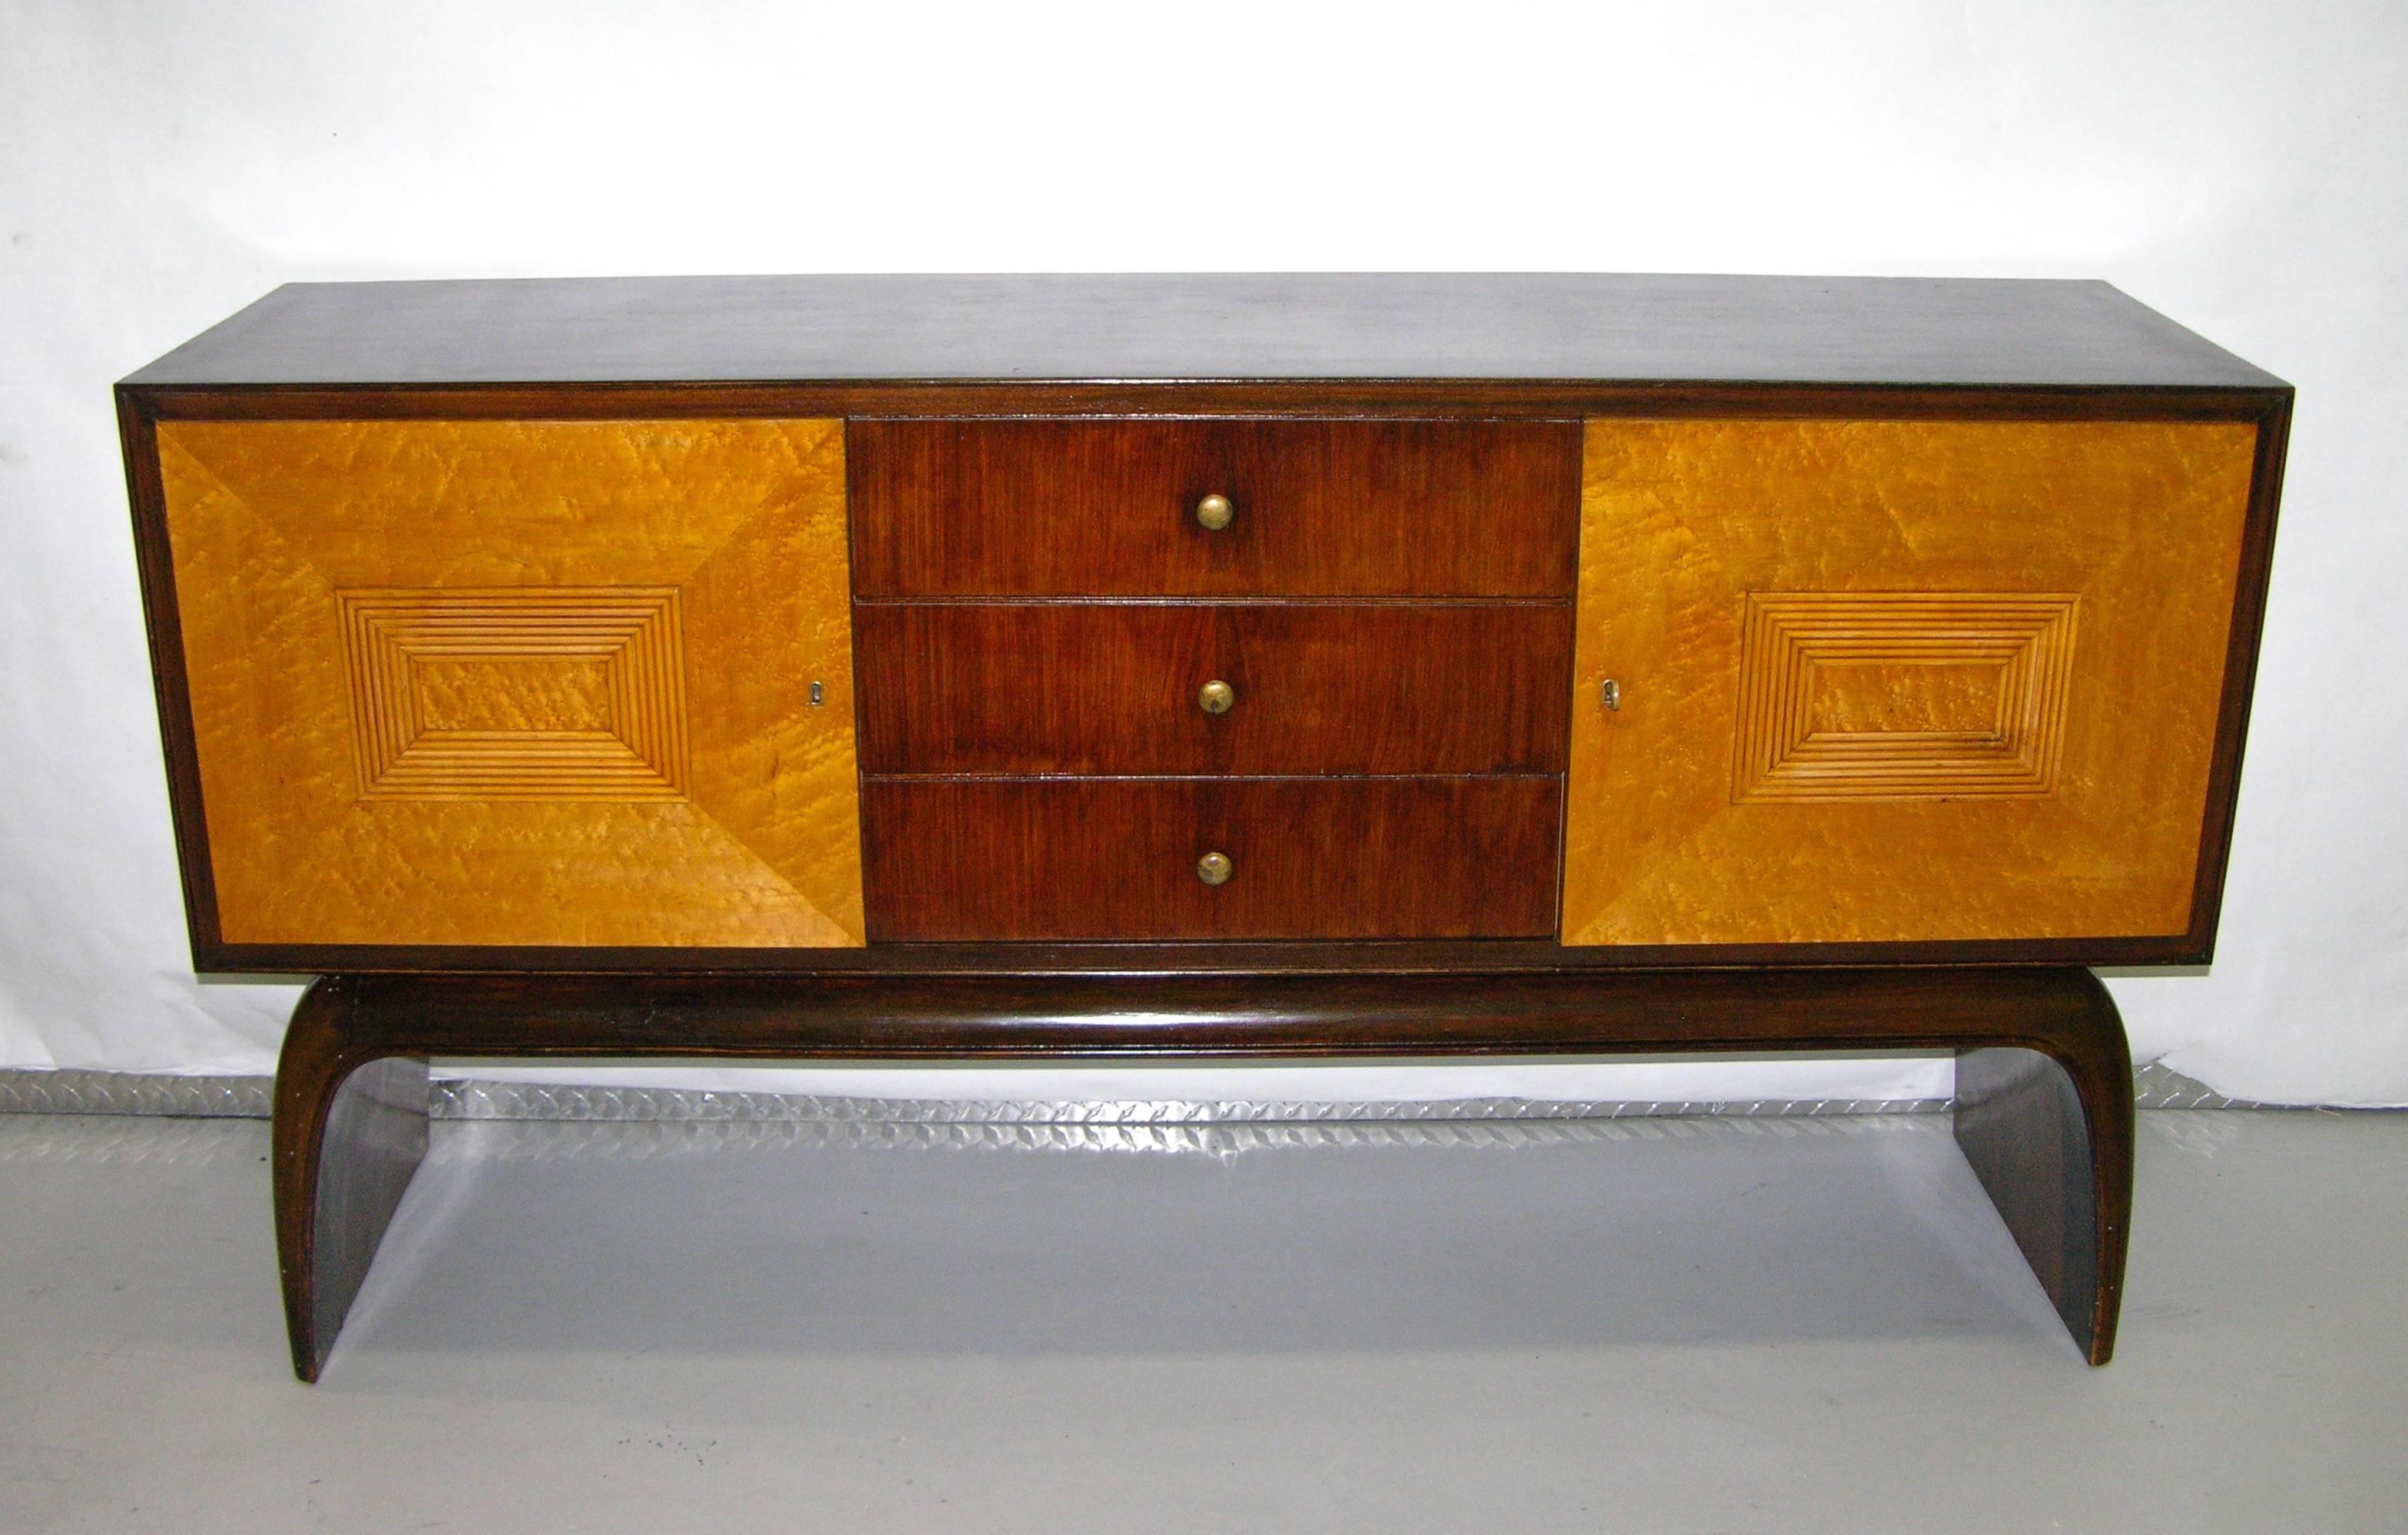 1930 Italian Antique Art Deco Two-Tone Rosewood and Burl Maple Sideboard/Console 2